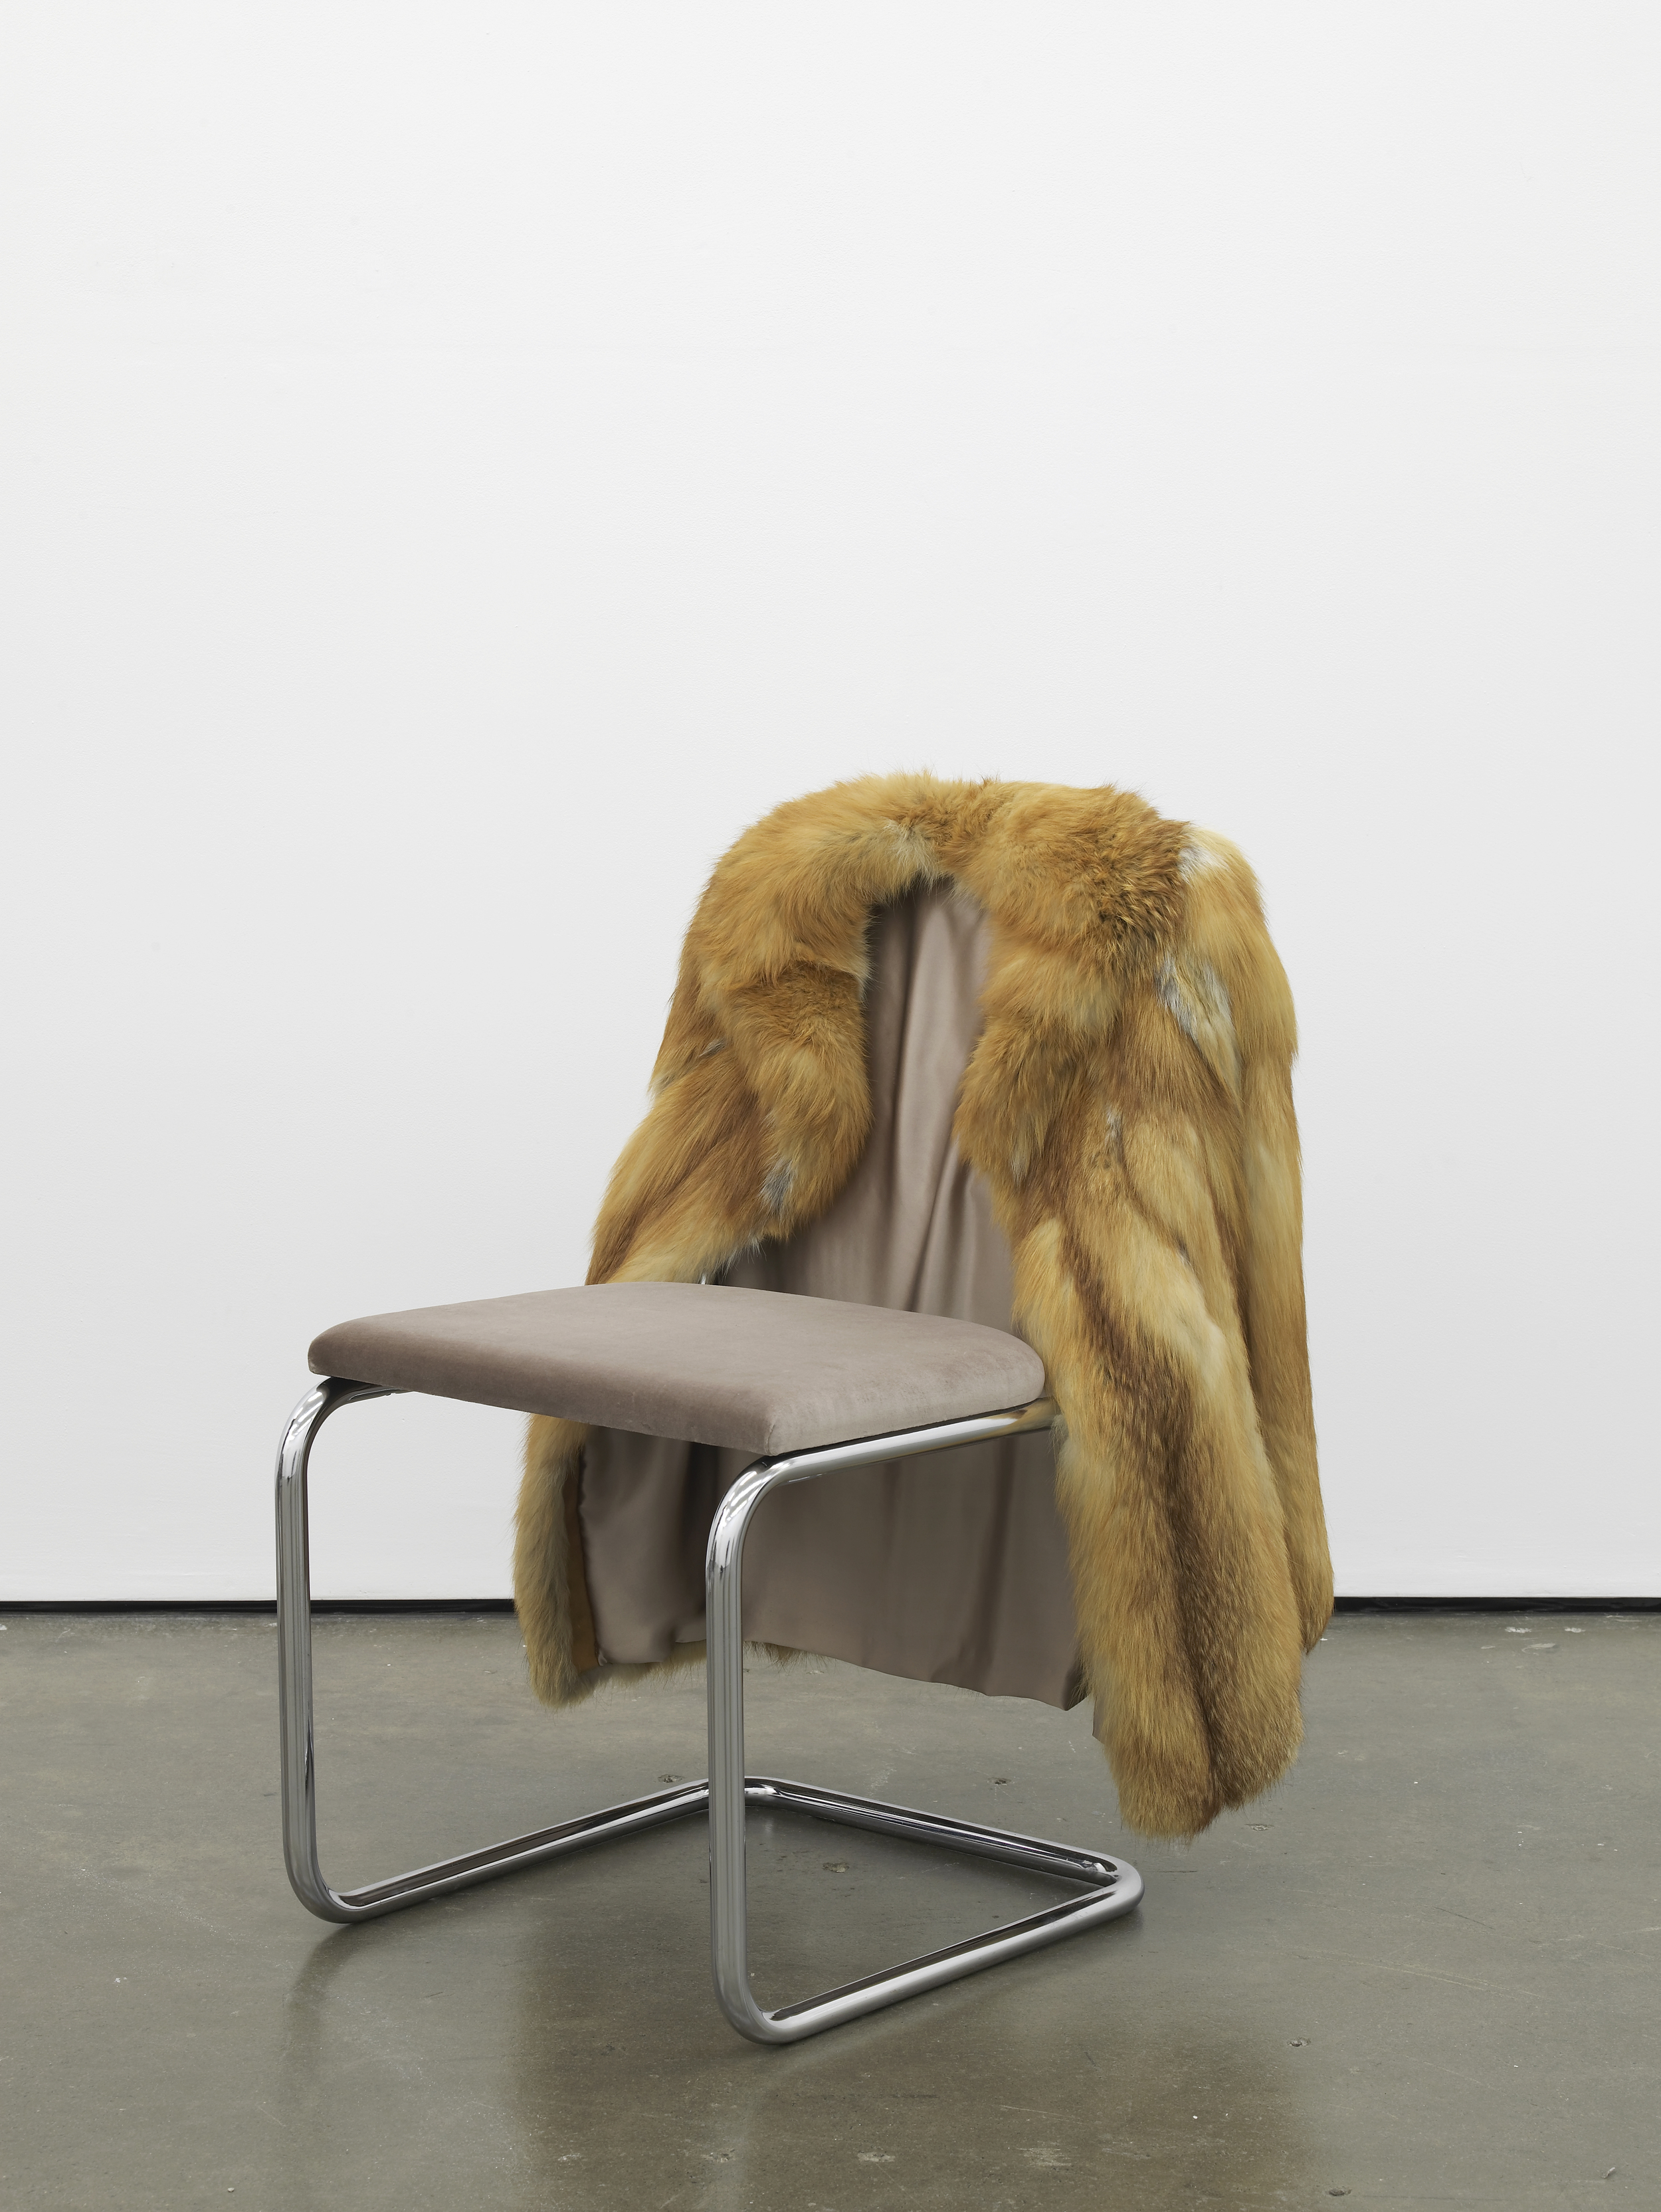     Untitled Chair - FXR-1 2015 Vintage fur, steel tubing, upholstery, silk and velvet 85 x 65 x 60 cm / 33.4 x 25.5 x 23.6 in 